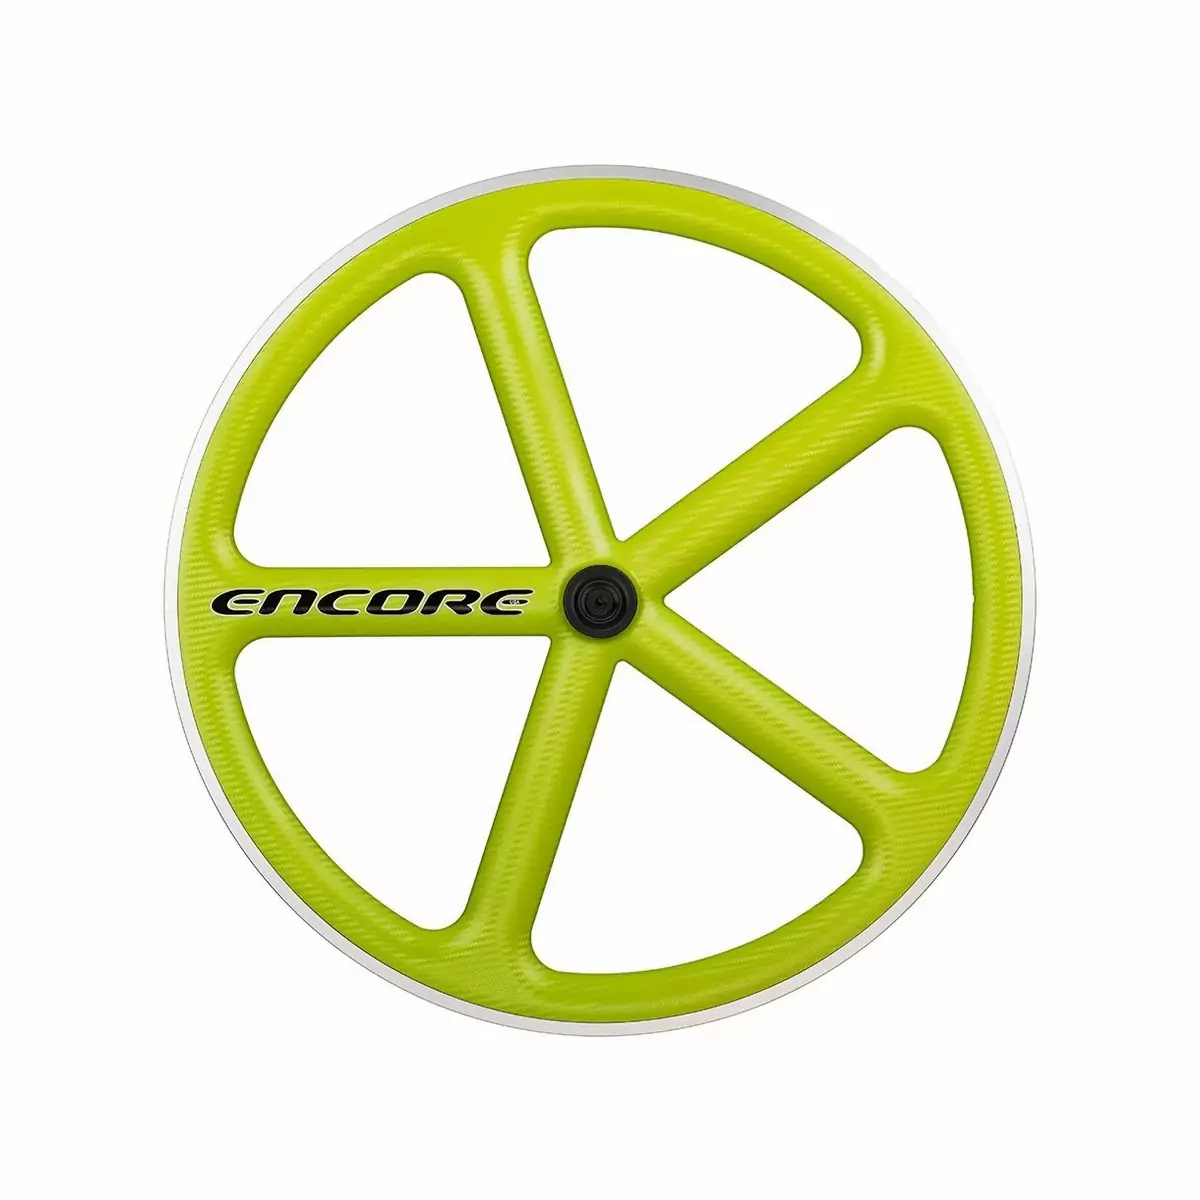 roue arrière 700c track 5 rayons carbone tissage lime msw - image